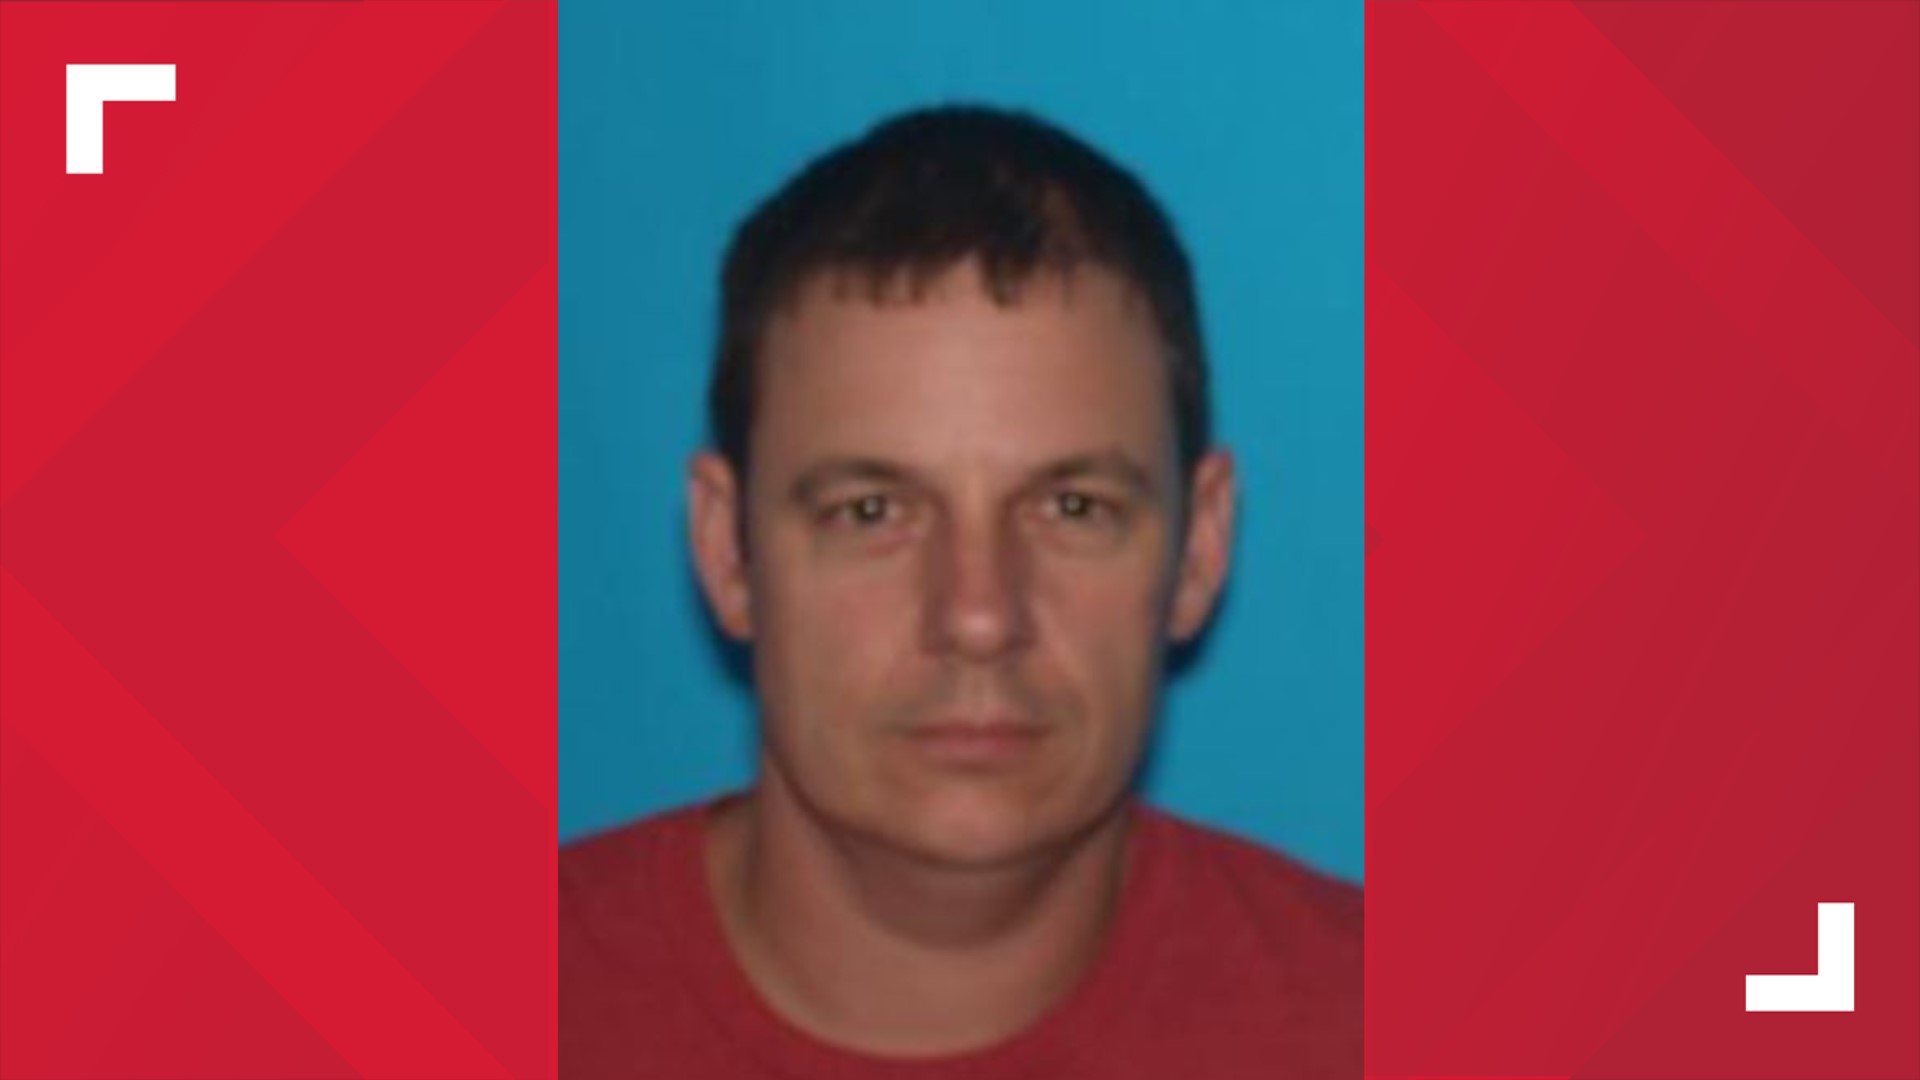 Charges were issued against 45-year-old James Kempf Friday afternoon, but he’s still not in custody.